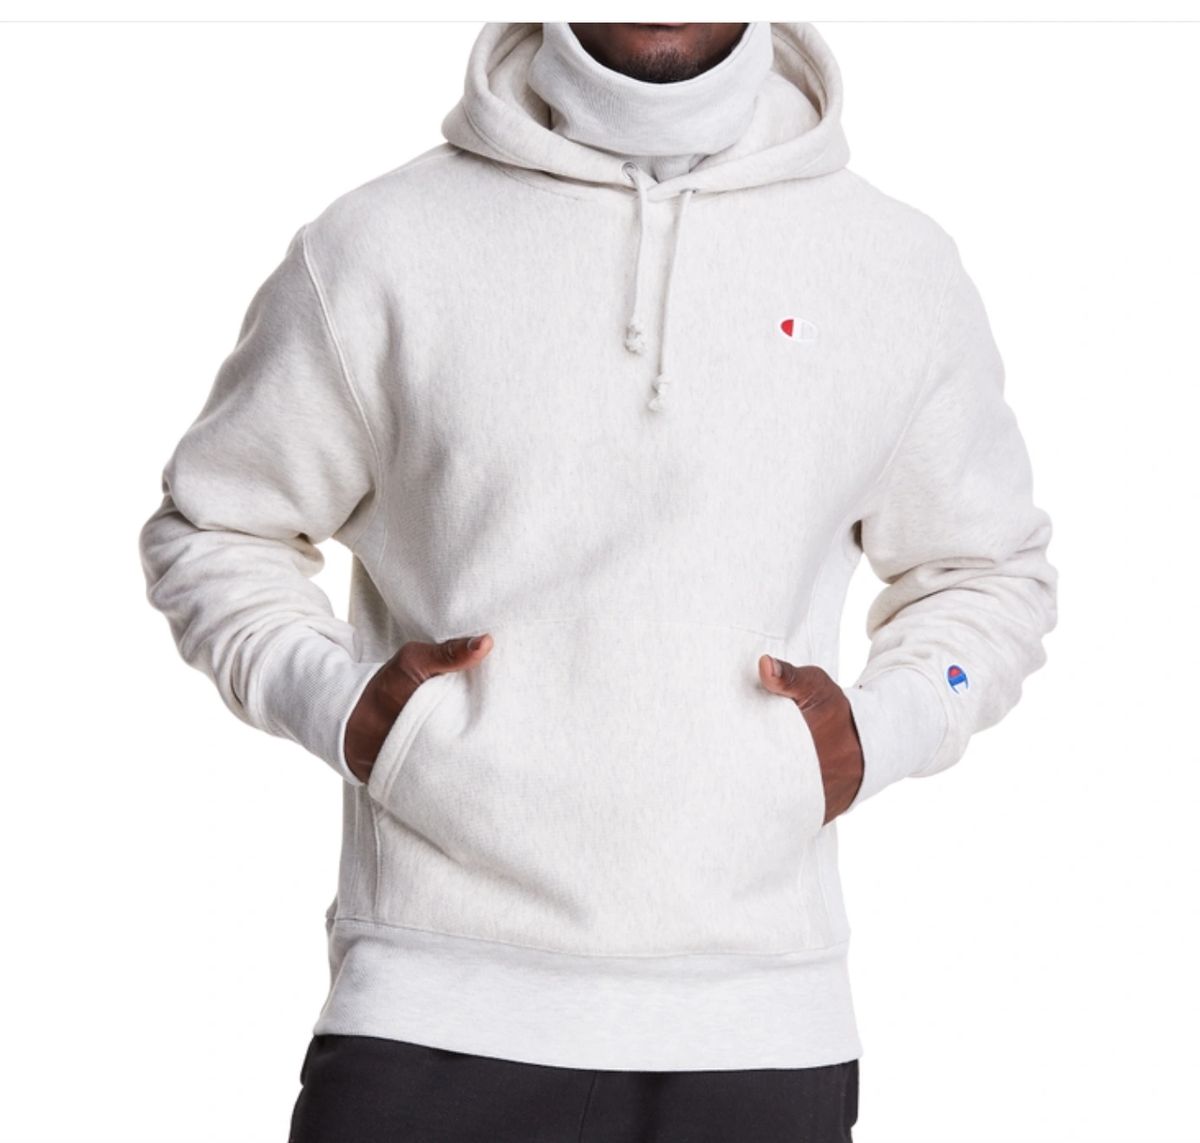 Champion® Launches Champion Defender Series Hoodies With PPE Functions